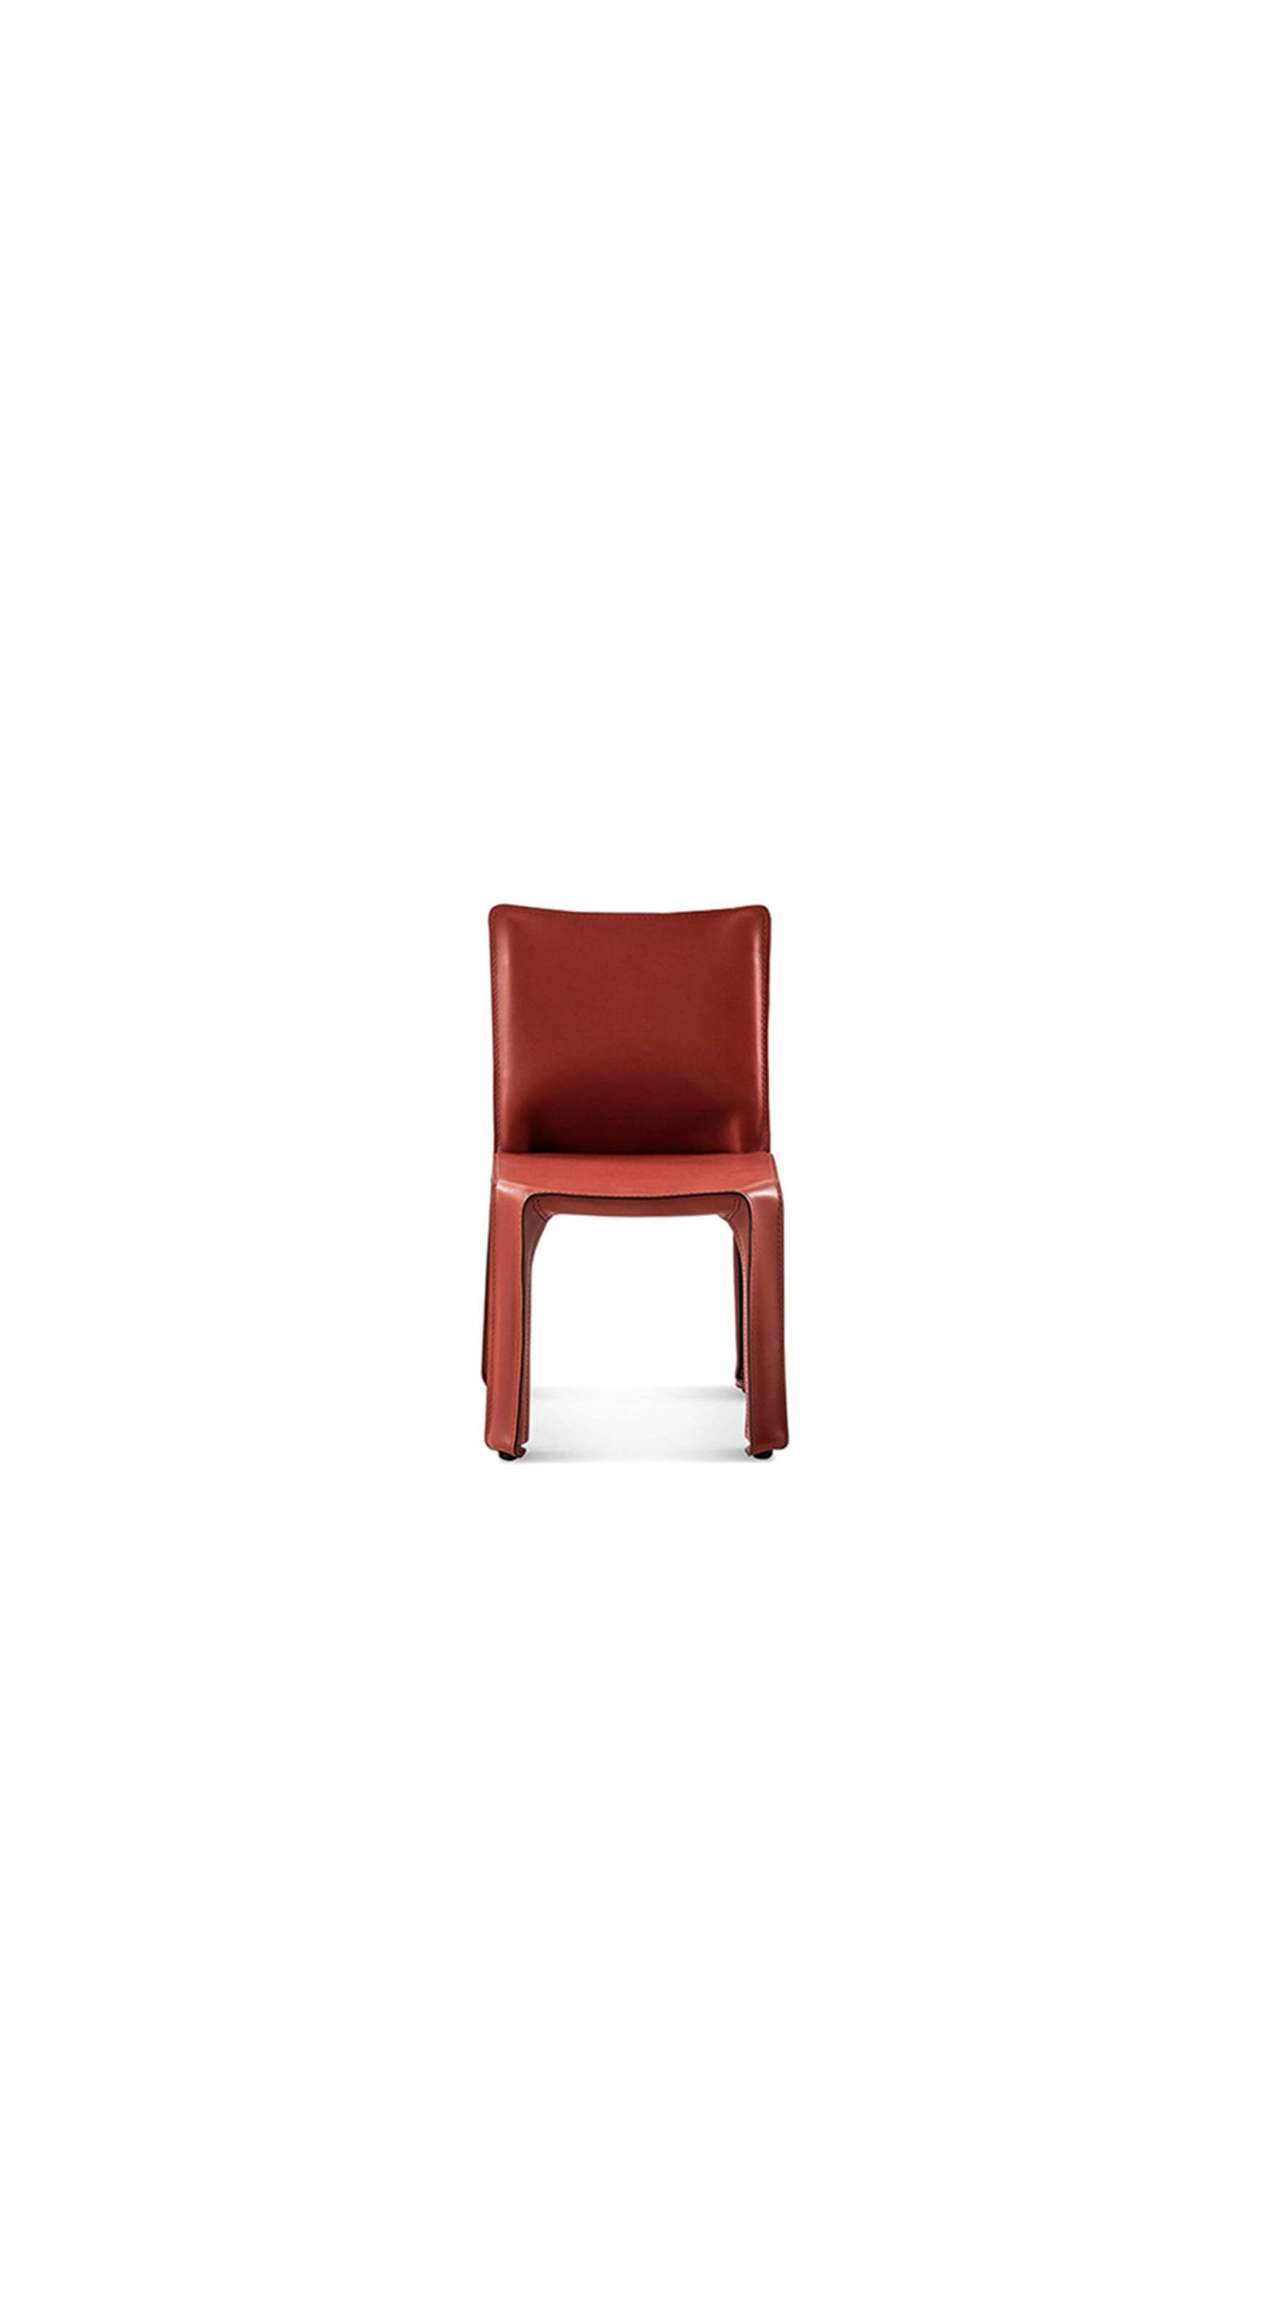 Baby Cab Chair by Mario Bellini | Cassina